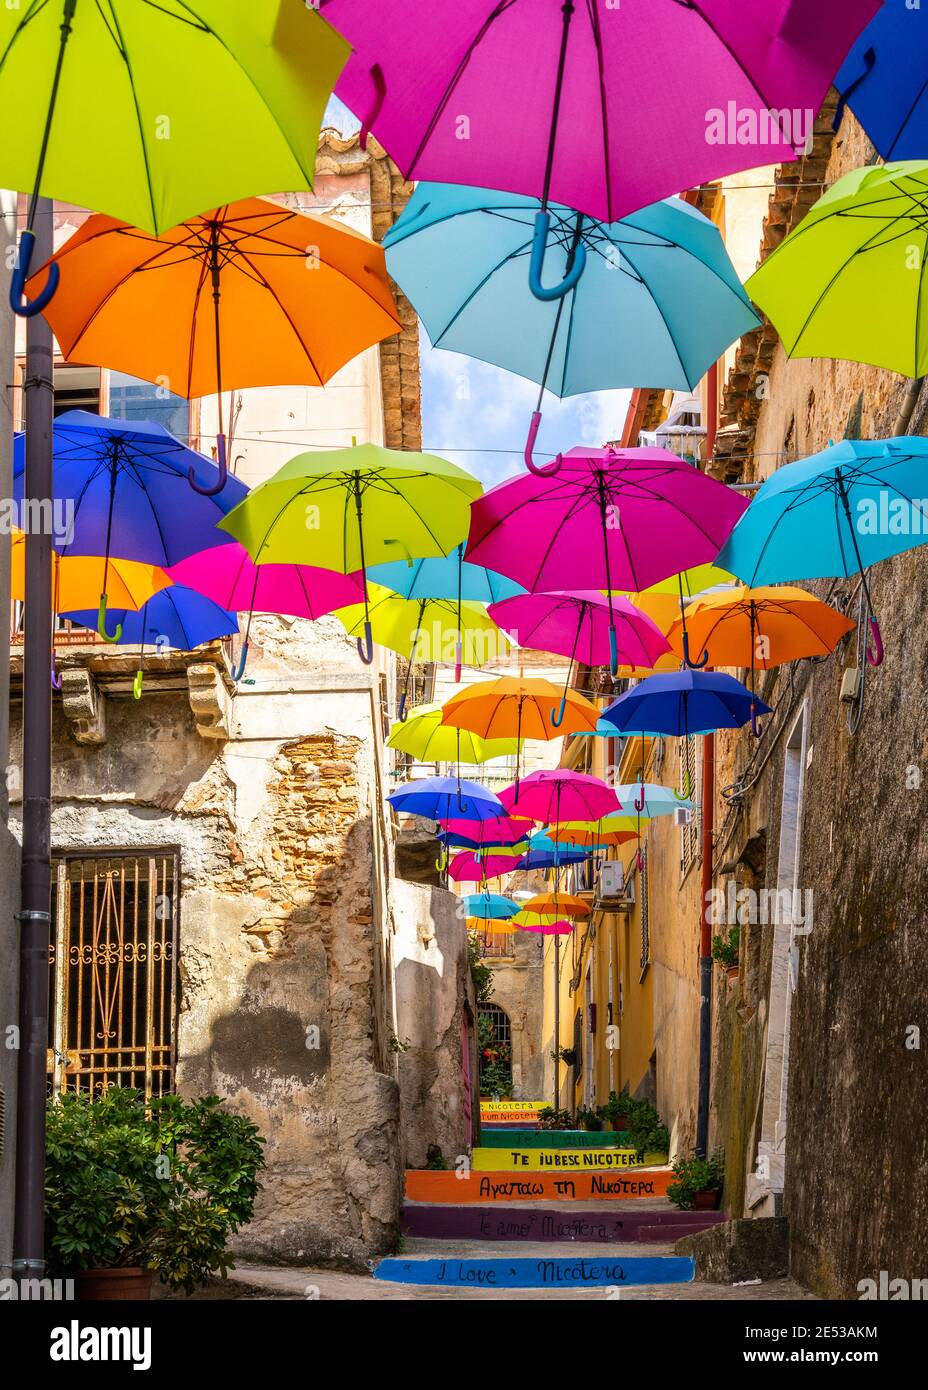 Typical narrow street with colorful floating umbrellas in Nicotera, Calabria, Italy Stock Photo